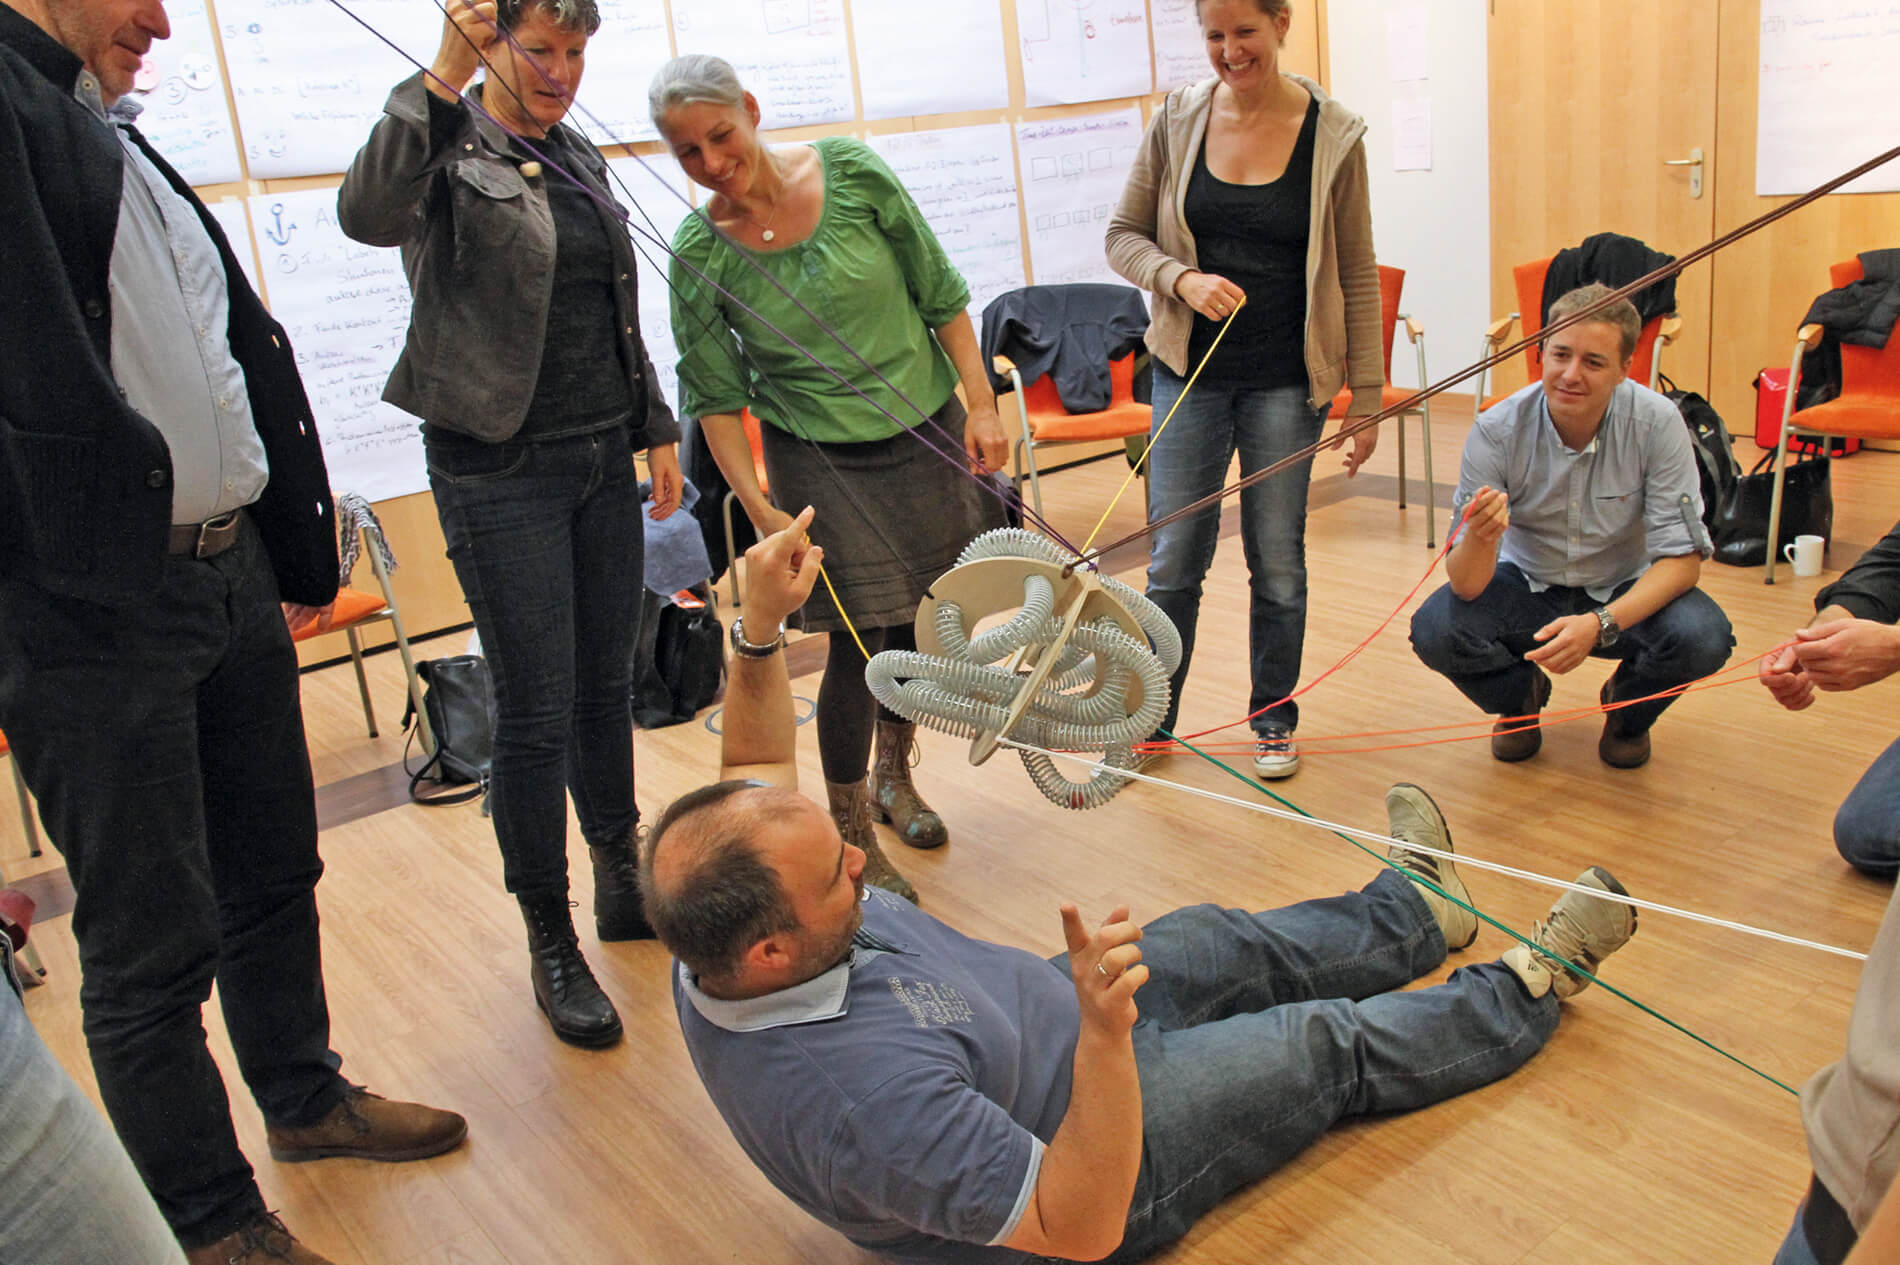 A trainer crouches beneath PerspActive coaching six adults in a fun team building activity